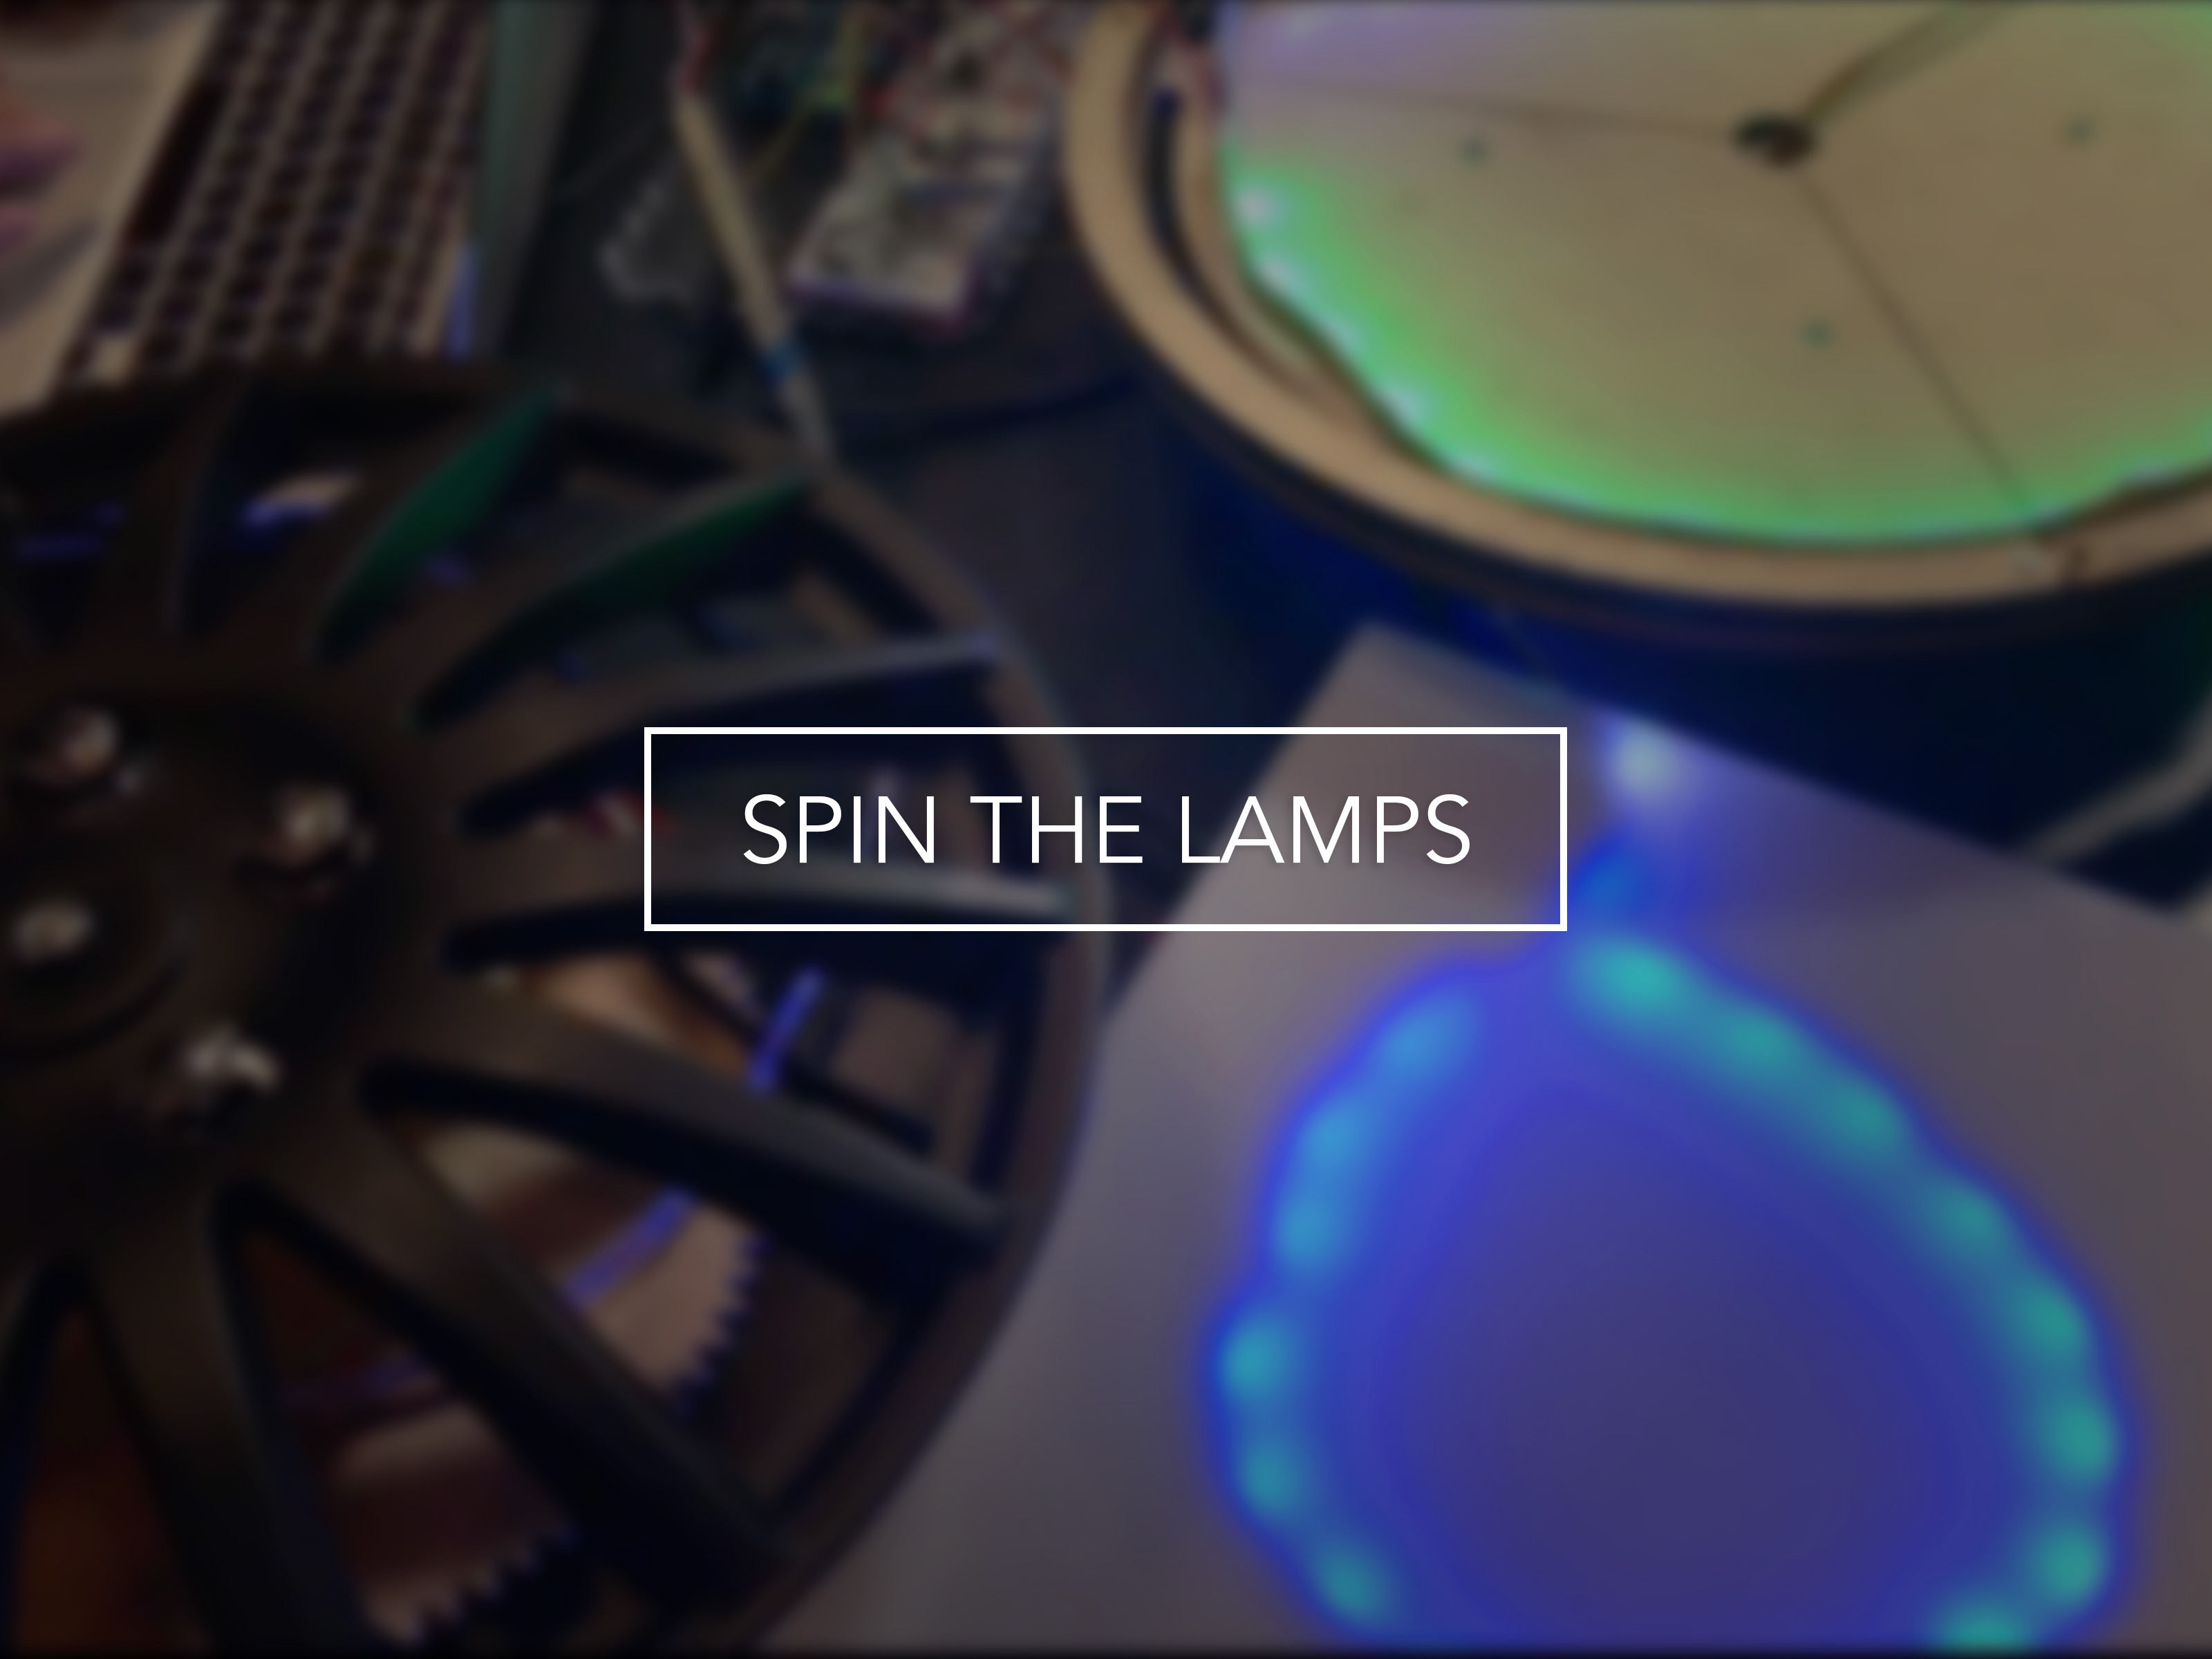 Spin the Lamp! is three different types of musical lighting sculptures that people can generate playful music by spinning them.